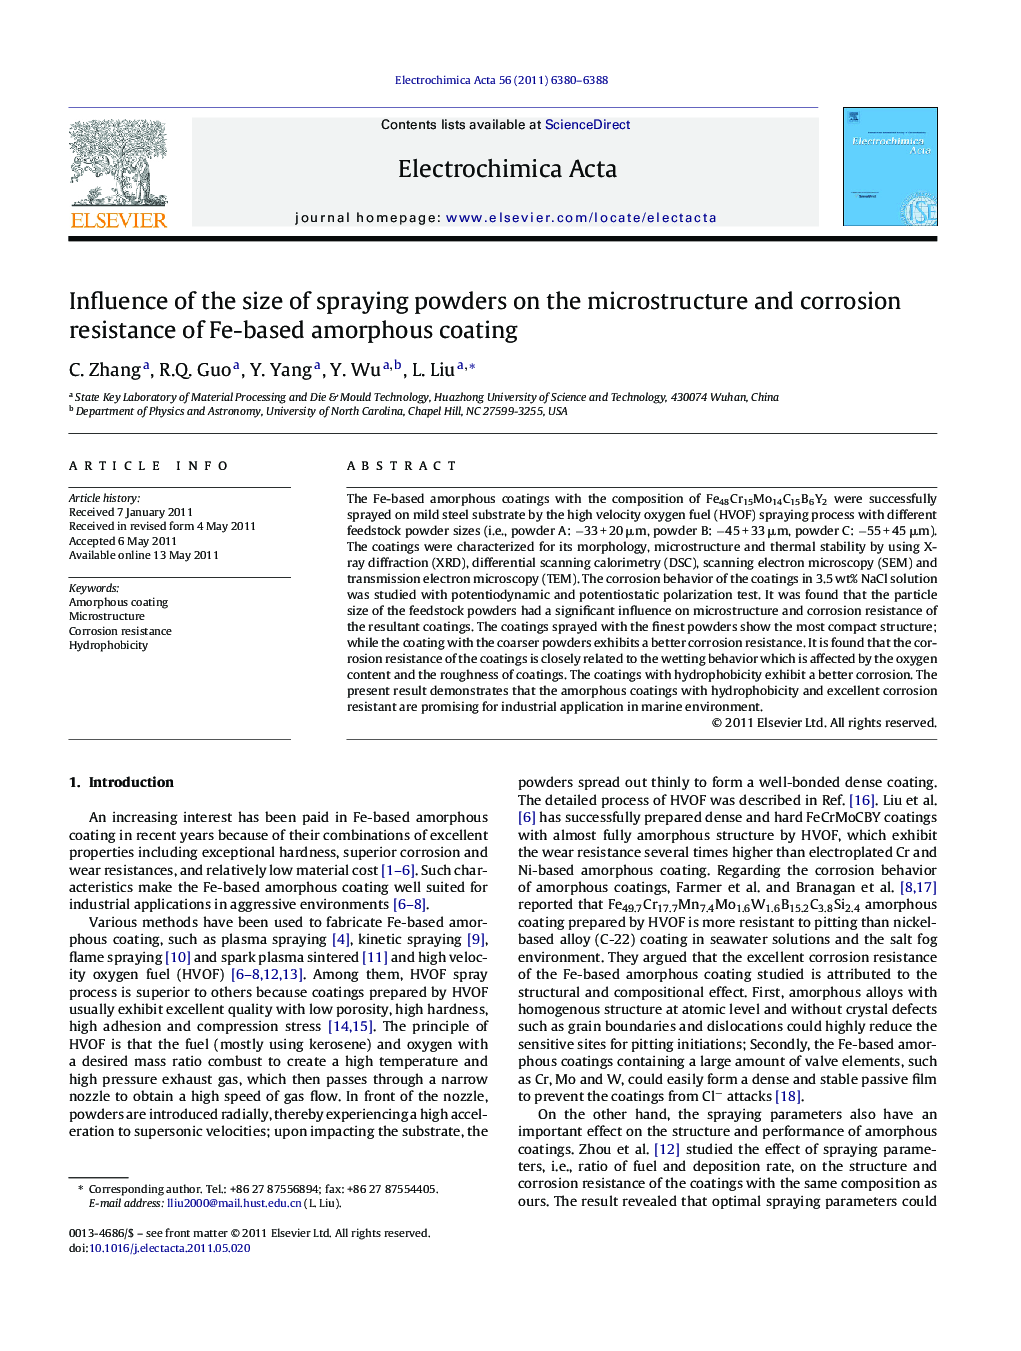 Influence of the size of spraying powders on the microstructure and corrosion resistance of Fe-based amorphous coating